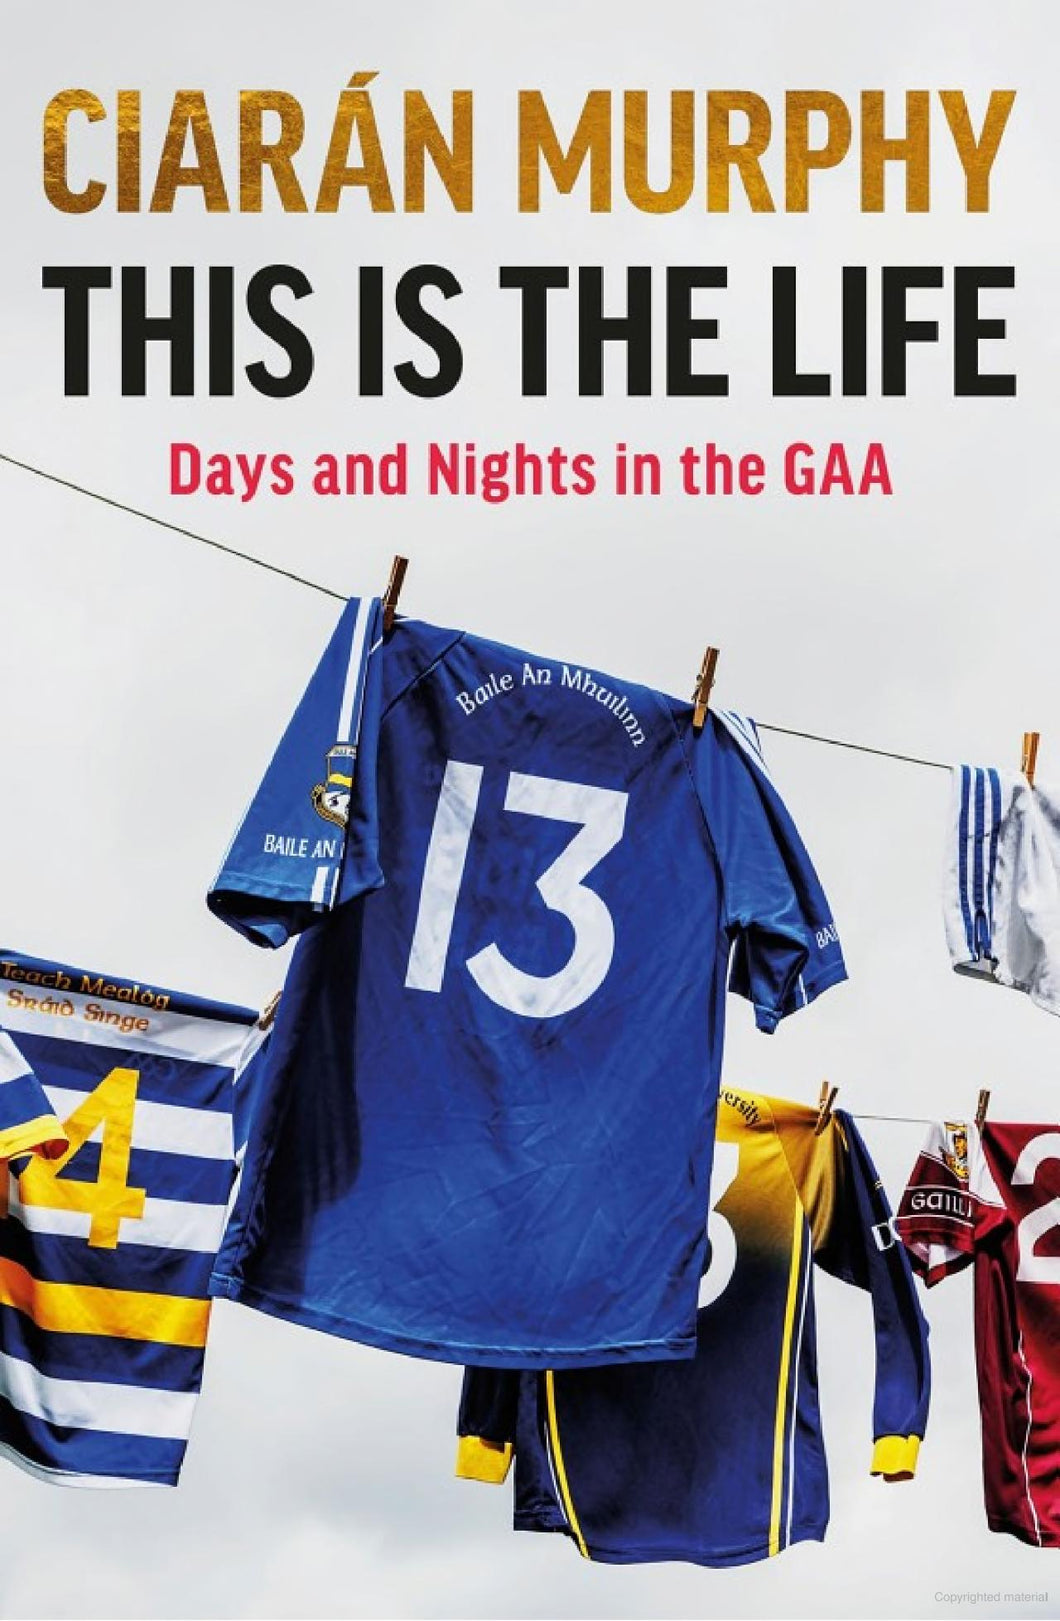 This is the life: Days and nights in the GAA